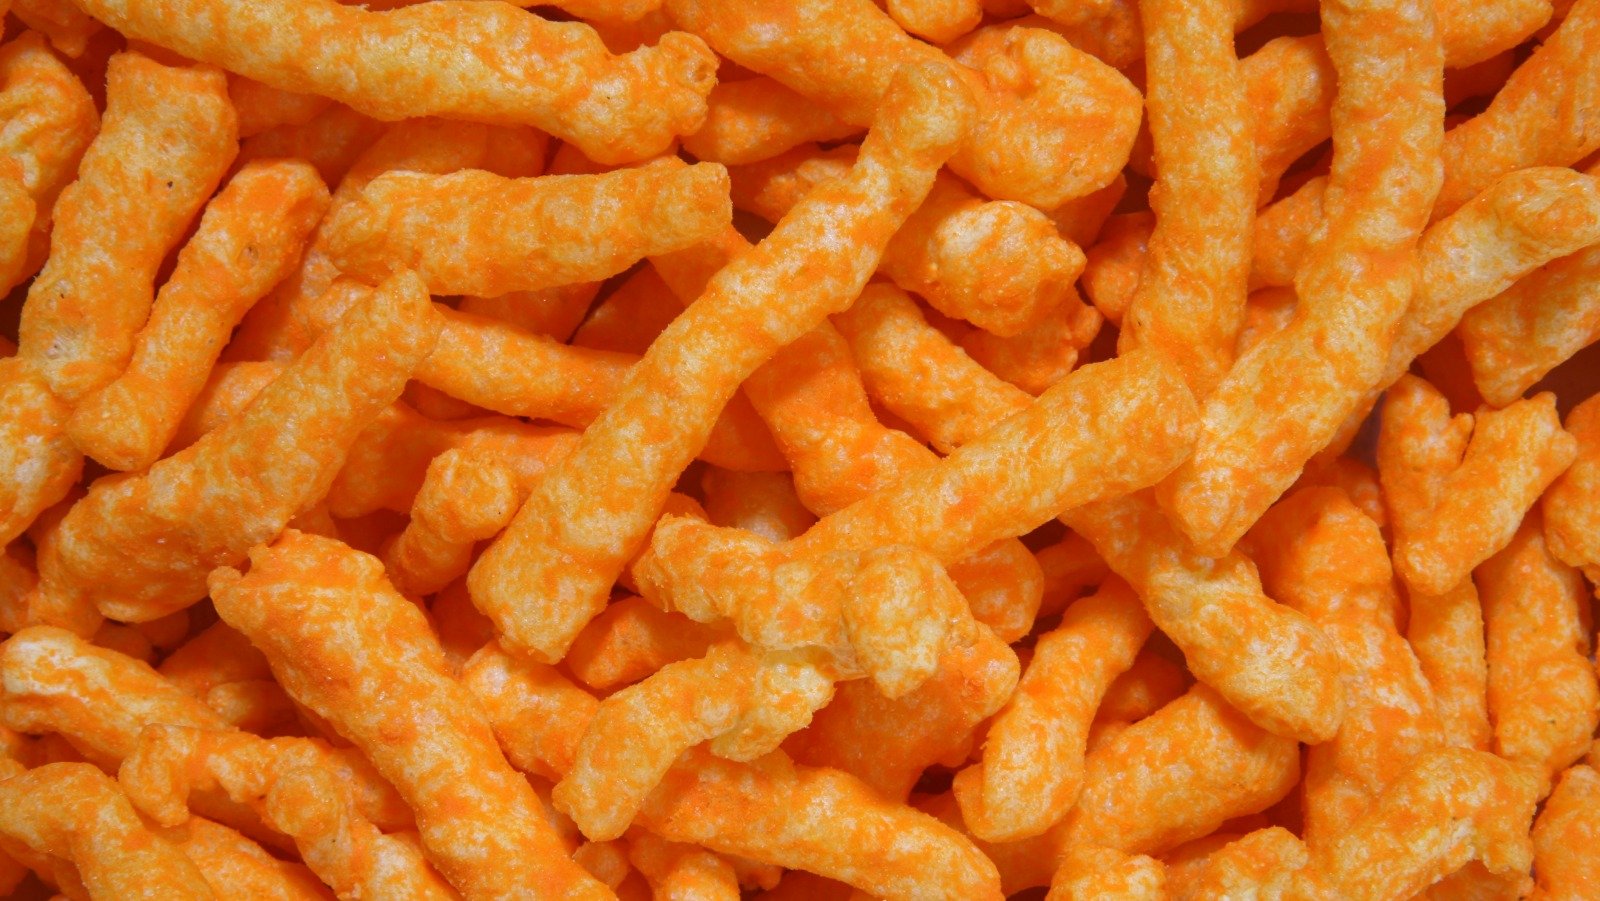 Cheetos Flavors Ranked Worst To Best - Mashed